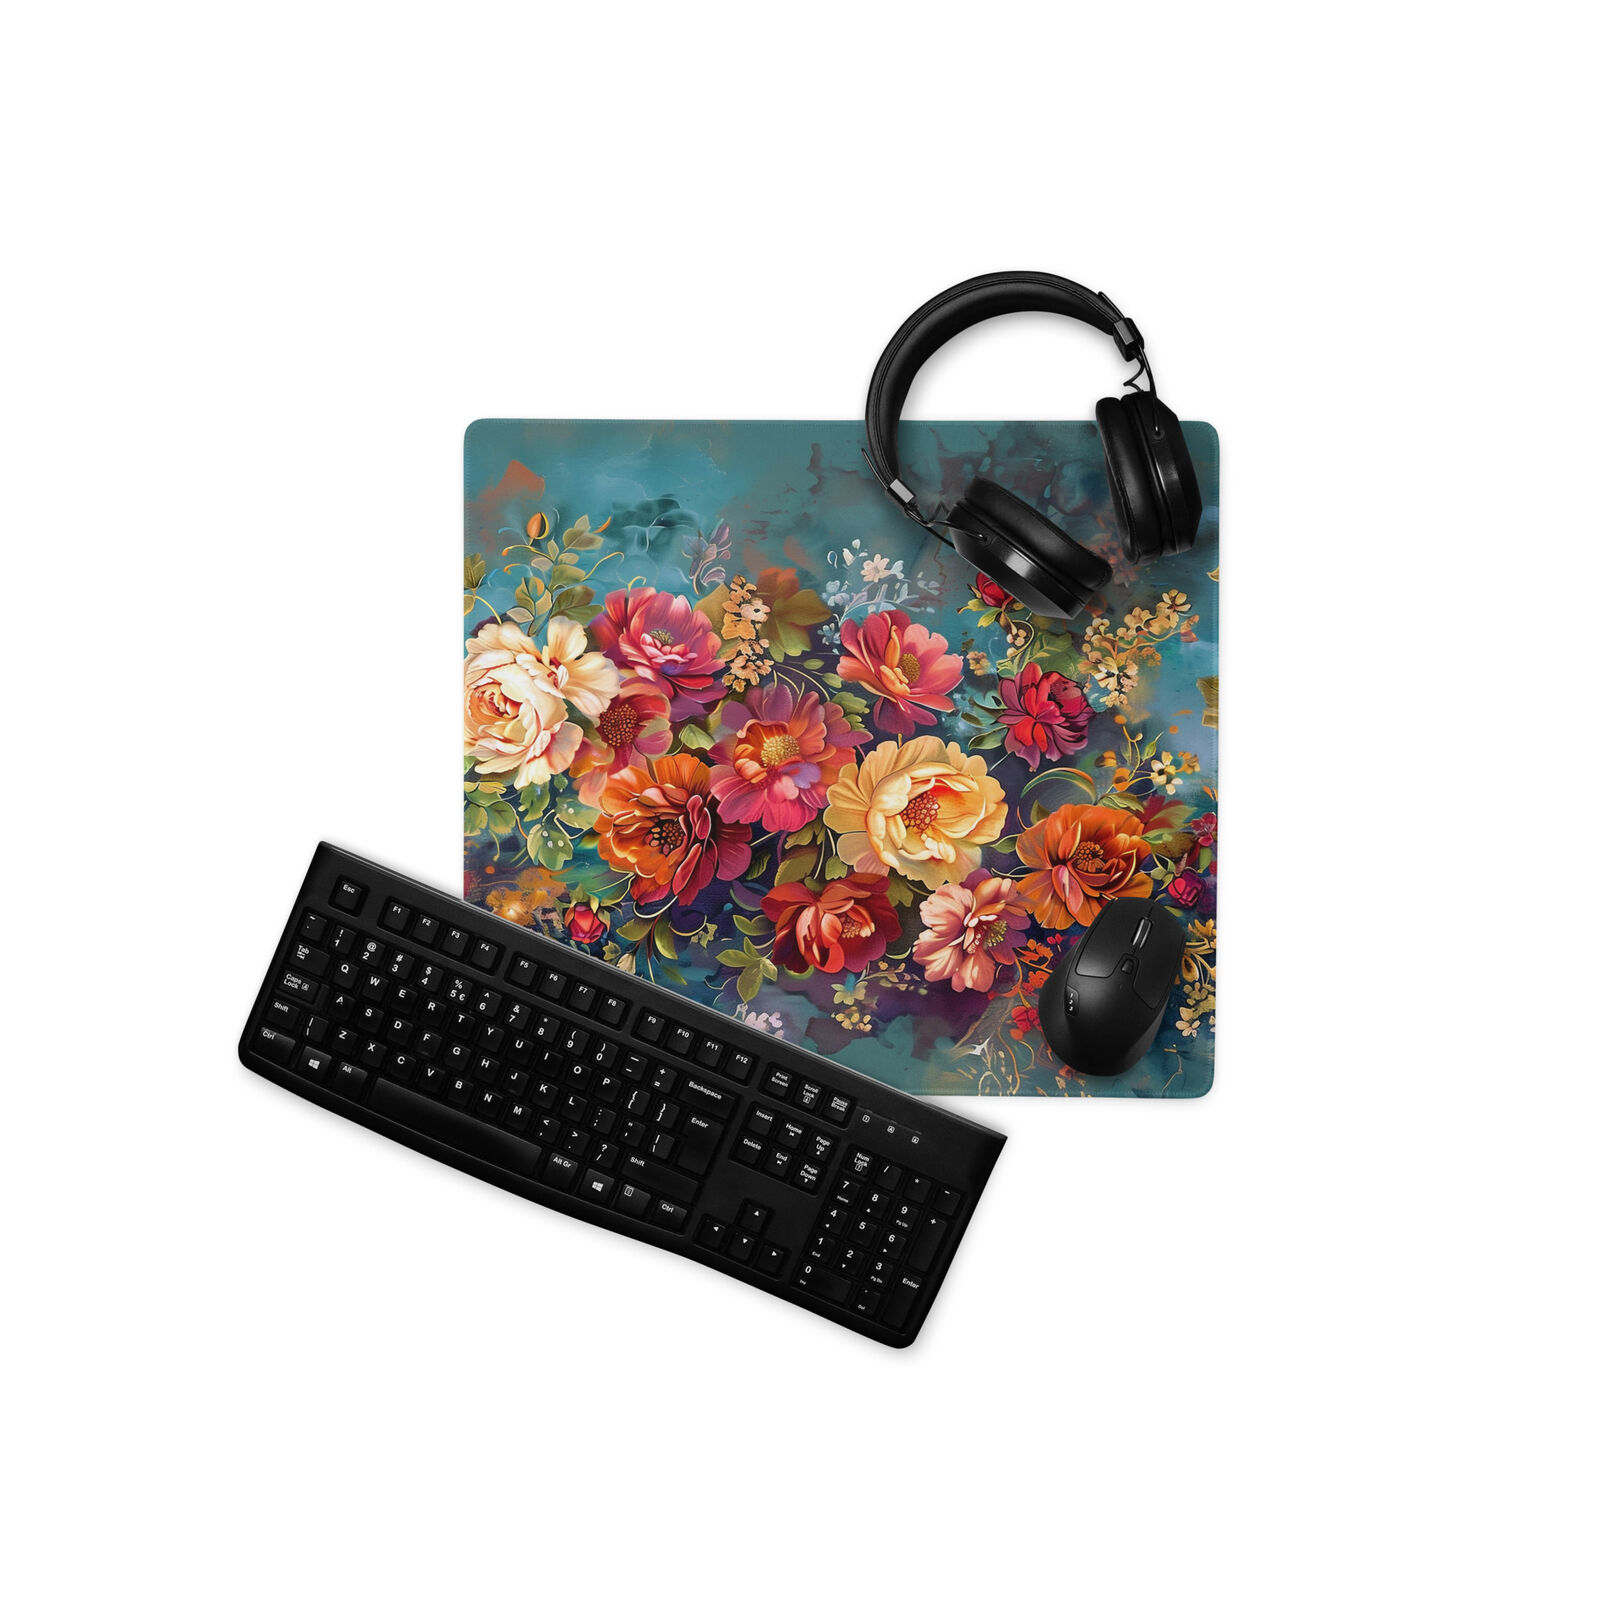 Roses Gaming Mouse Pad, Floral Mousepad, Vintage Print Extended Deskmat